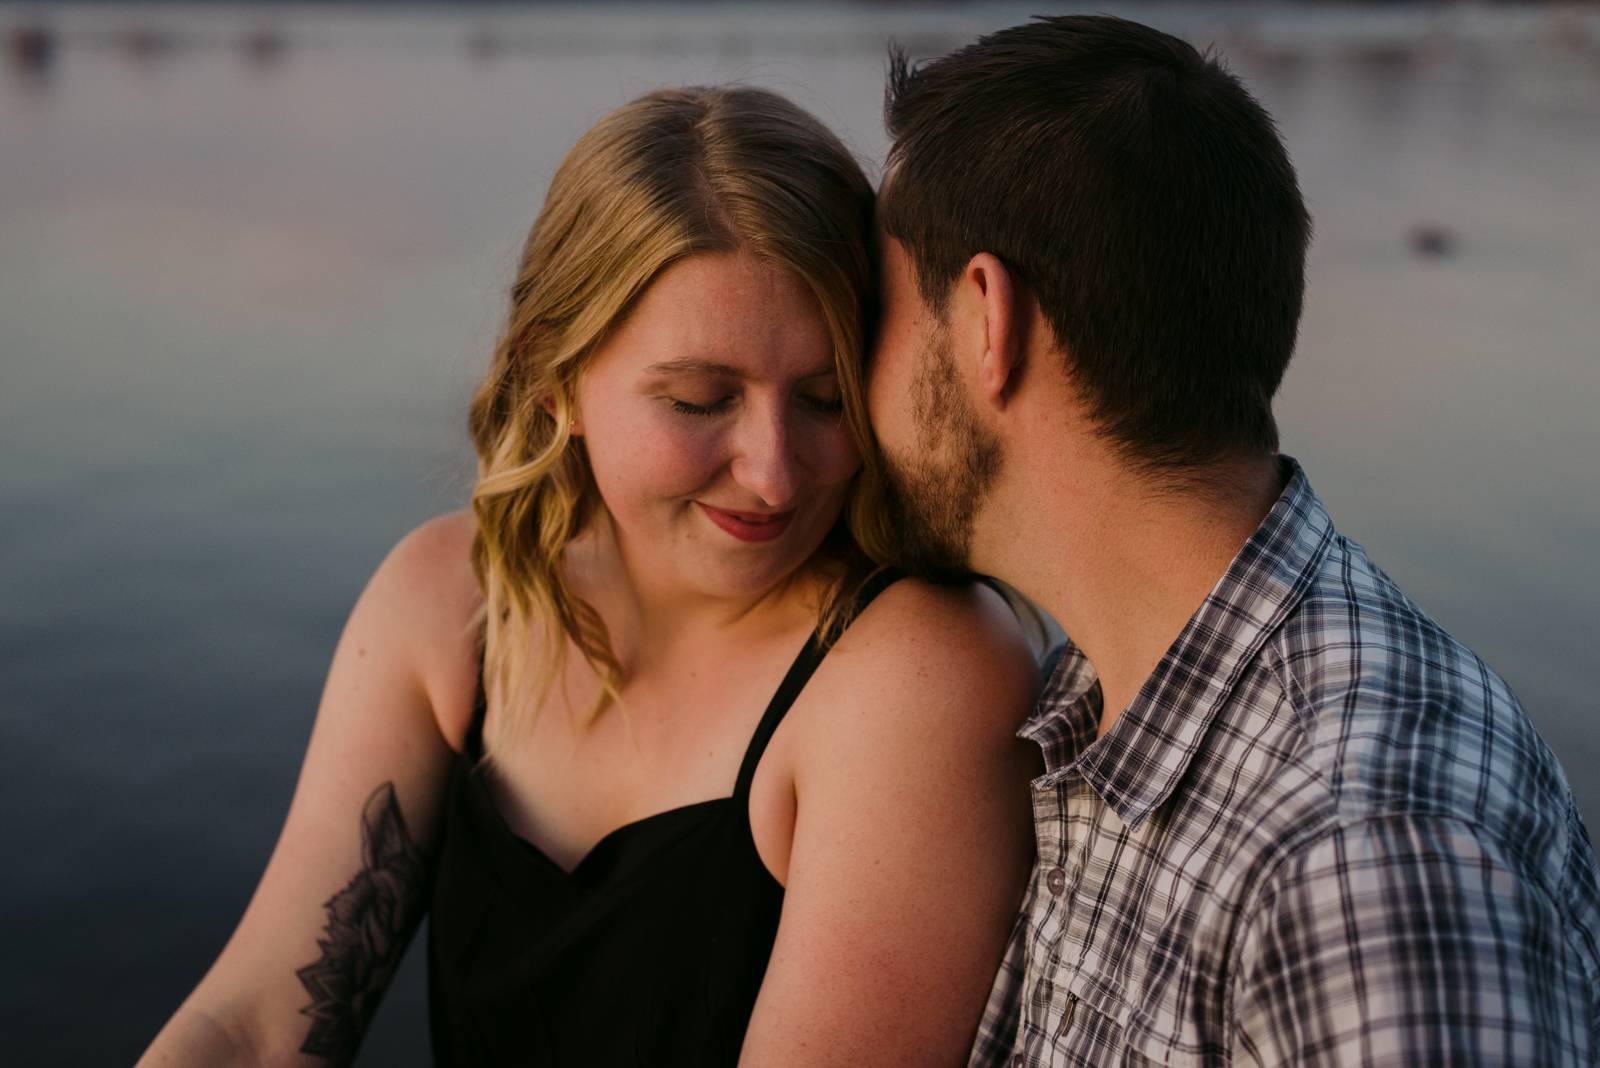 engaged couple cuddling by the water at sunset